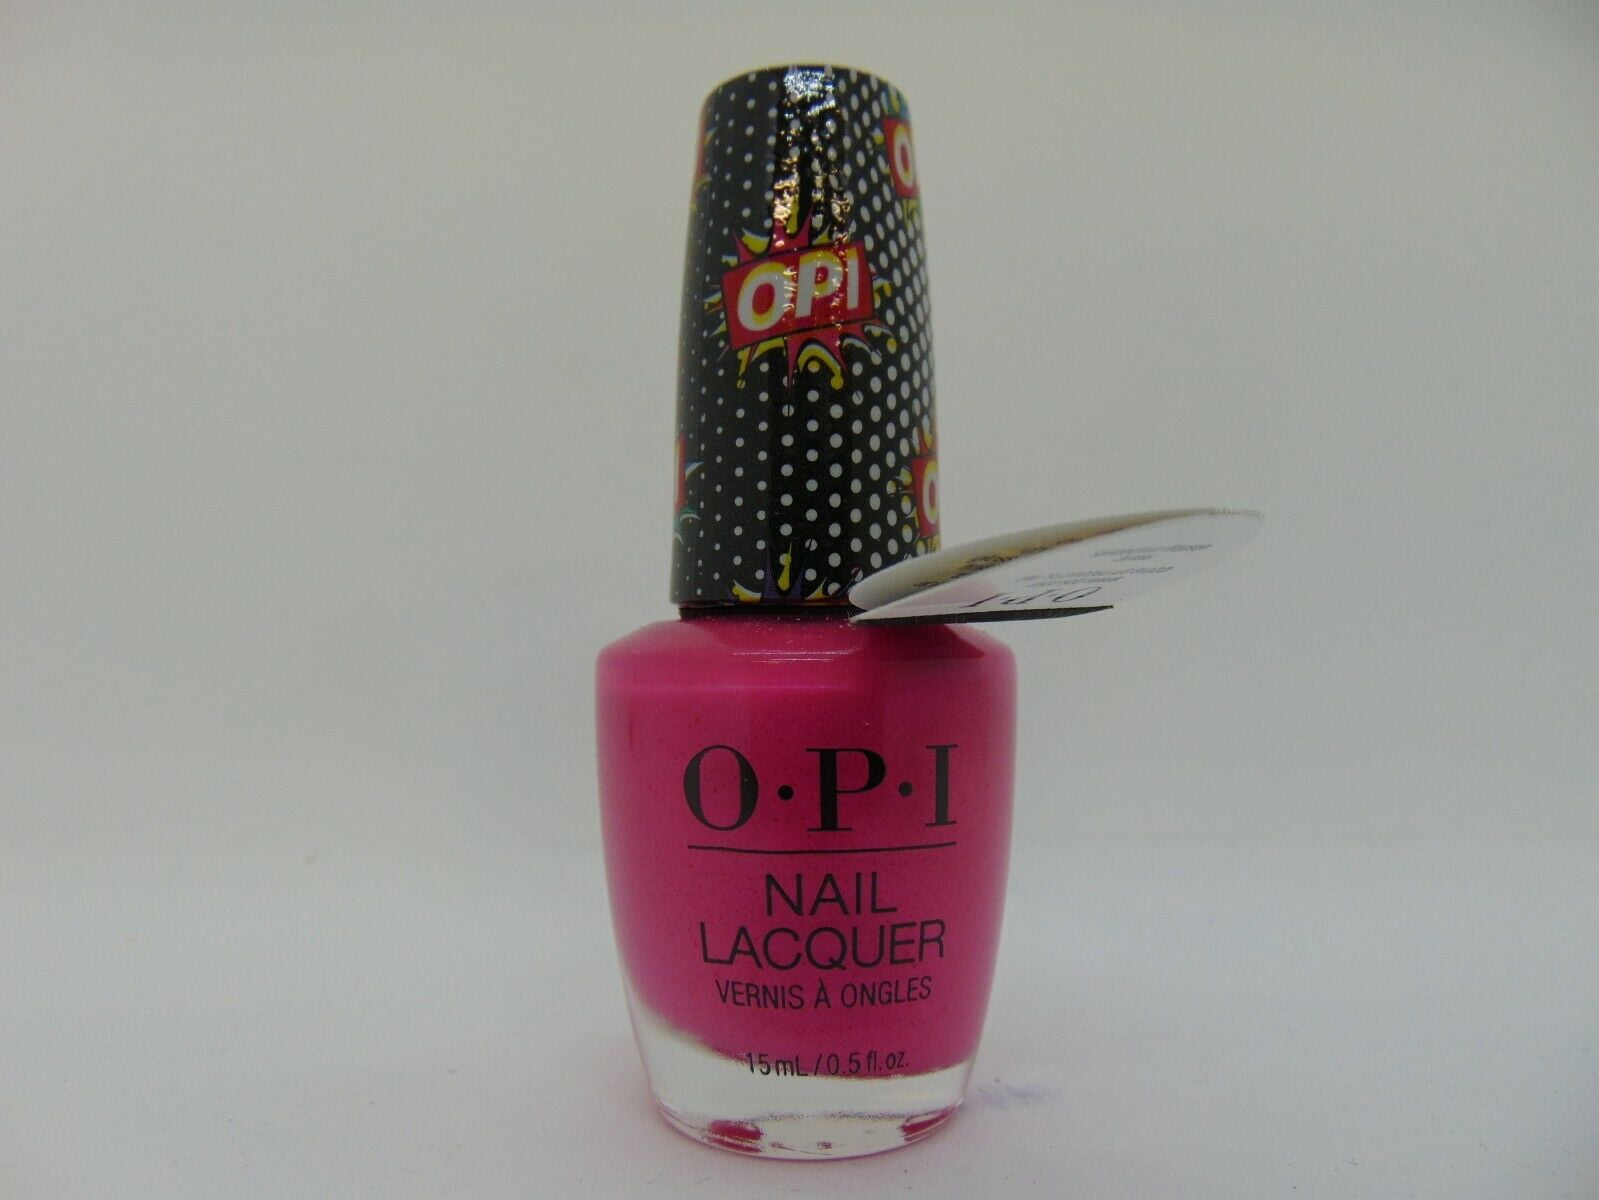 3. OPI Nail Lacquer in Peach Side Babe - wide 2